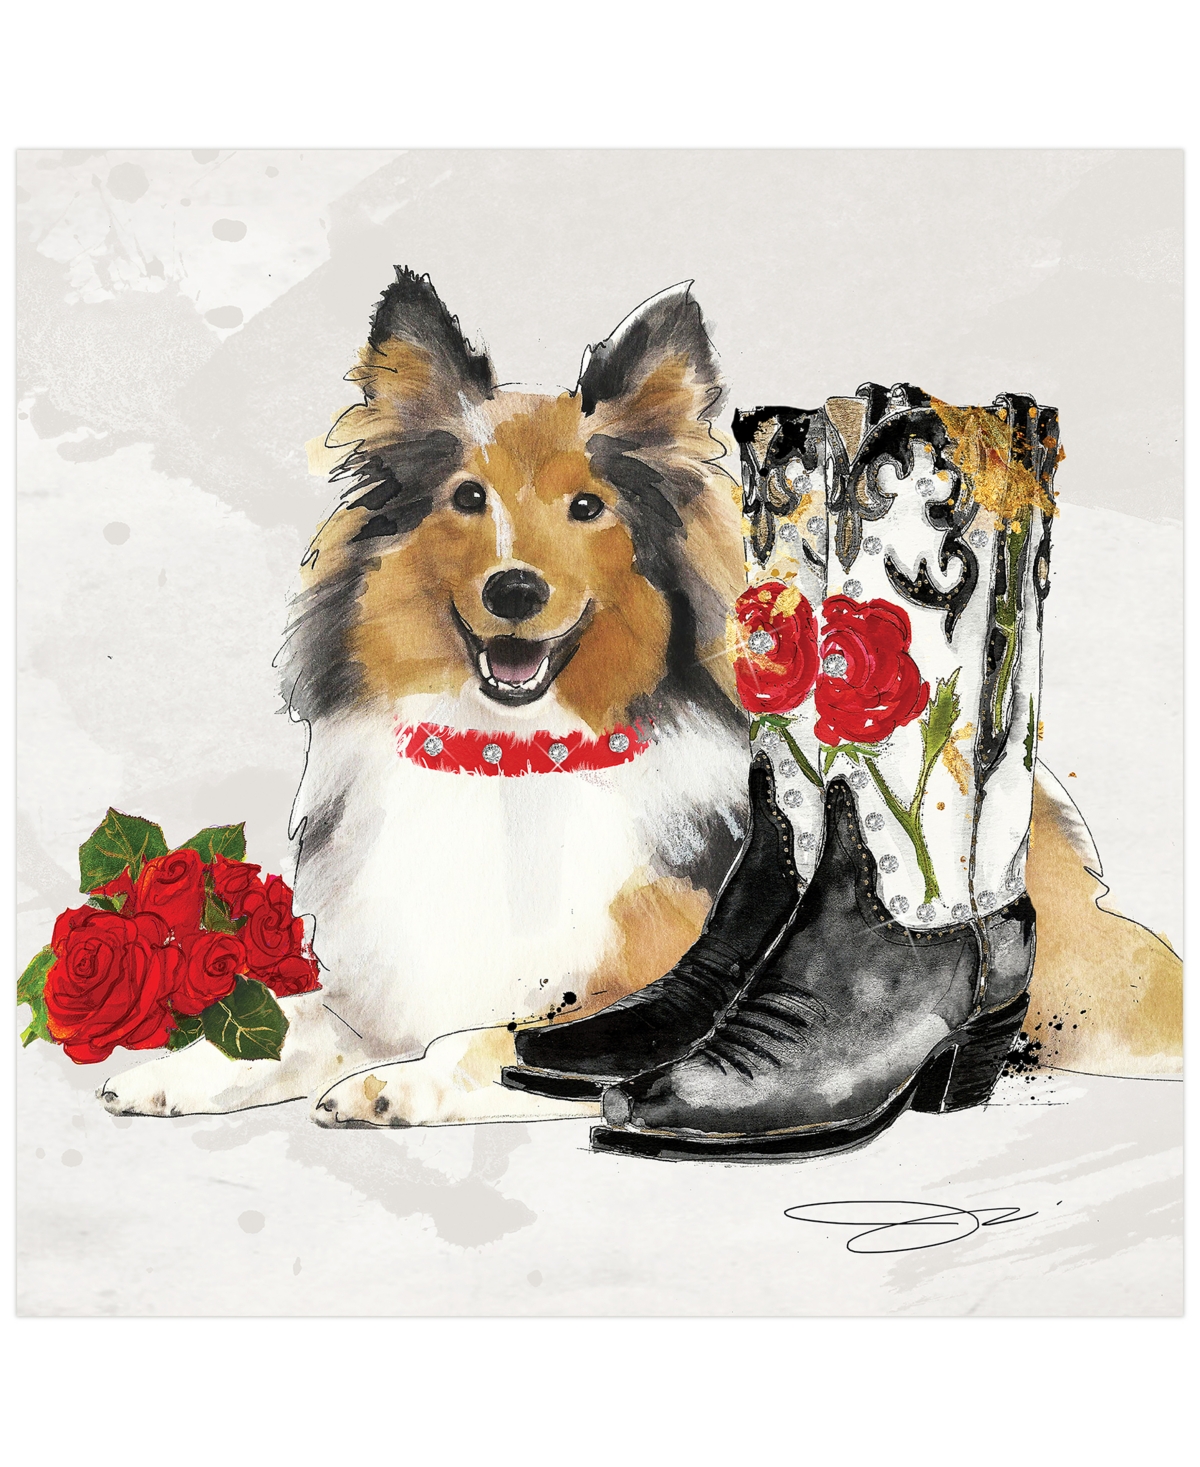 Empire Art Direct "collie" Unframed Free Floating Tempered Glass Panel Graphic Dog Wall Art Print 20" X 20", 20" X 20" In Multi-color